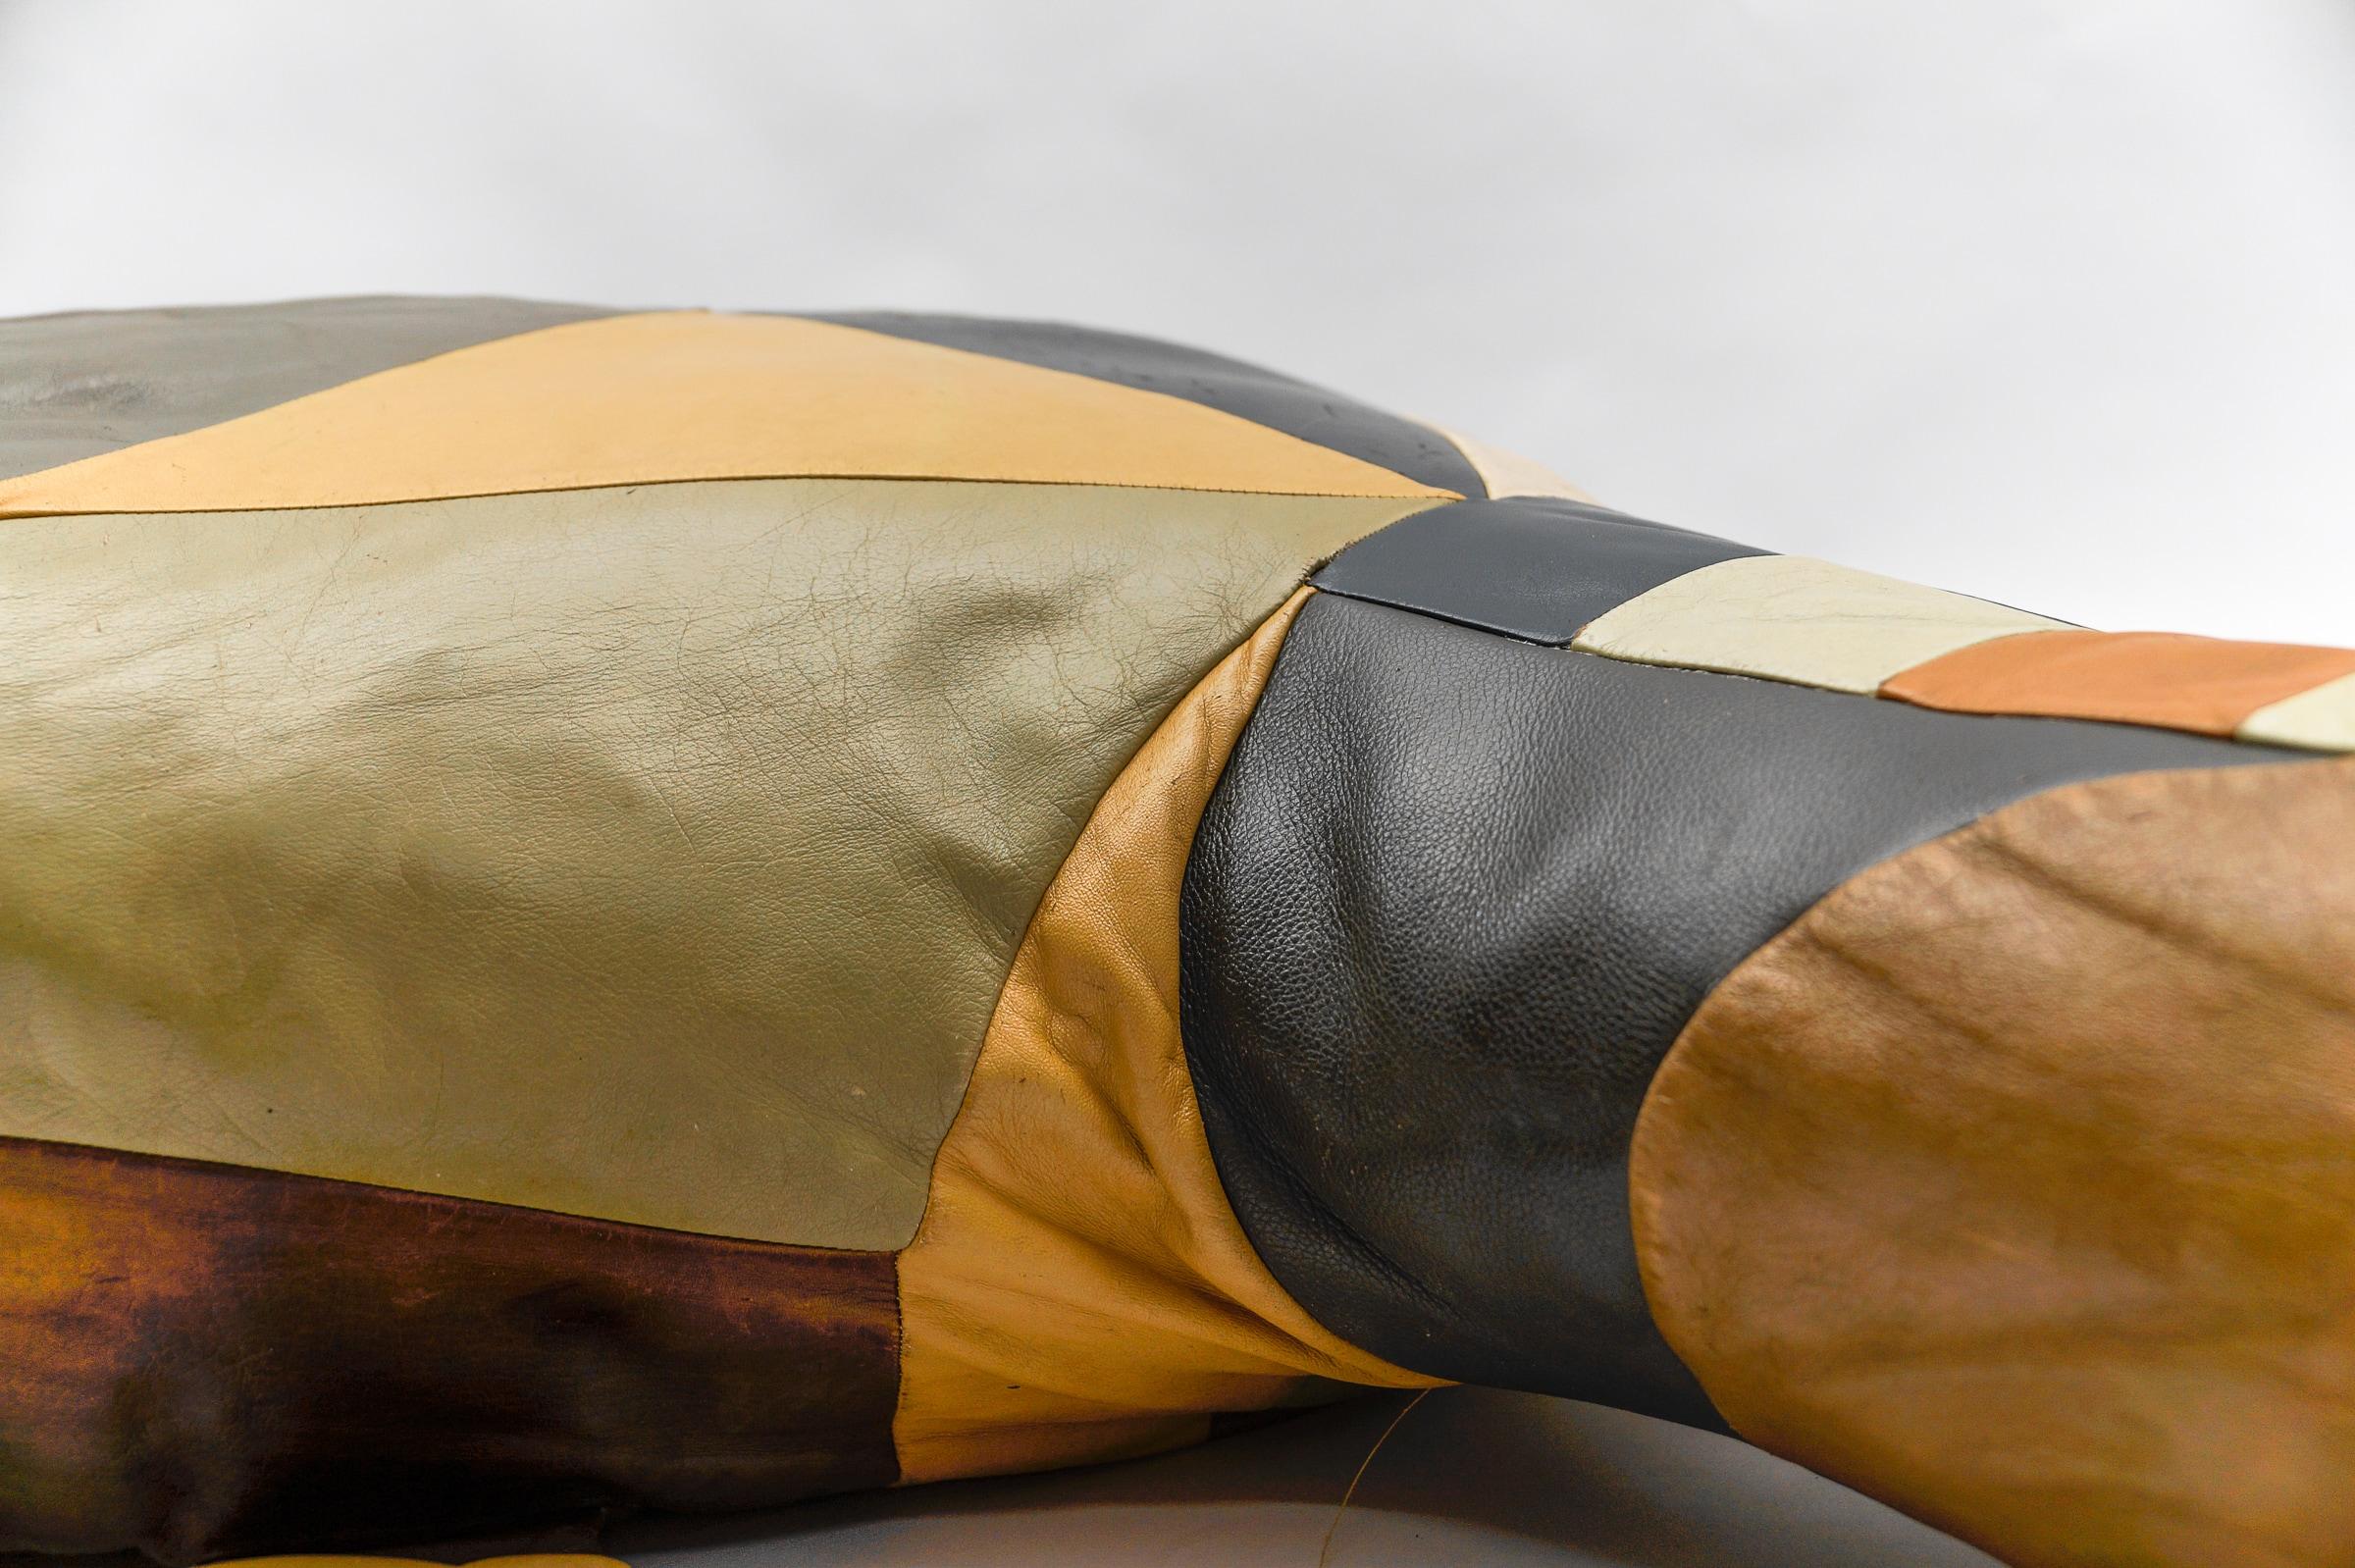 Set of 3 Leather Patchwork Turtle Poufs - Mid-Century Modern, Switzerland, 1960s For Sale 6